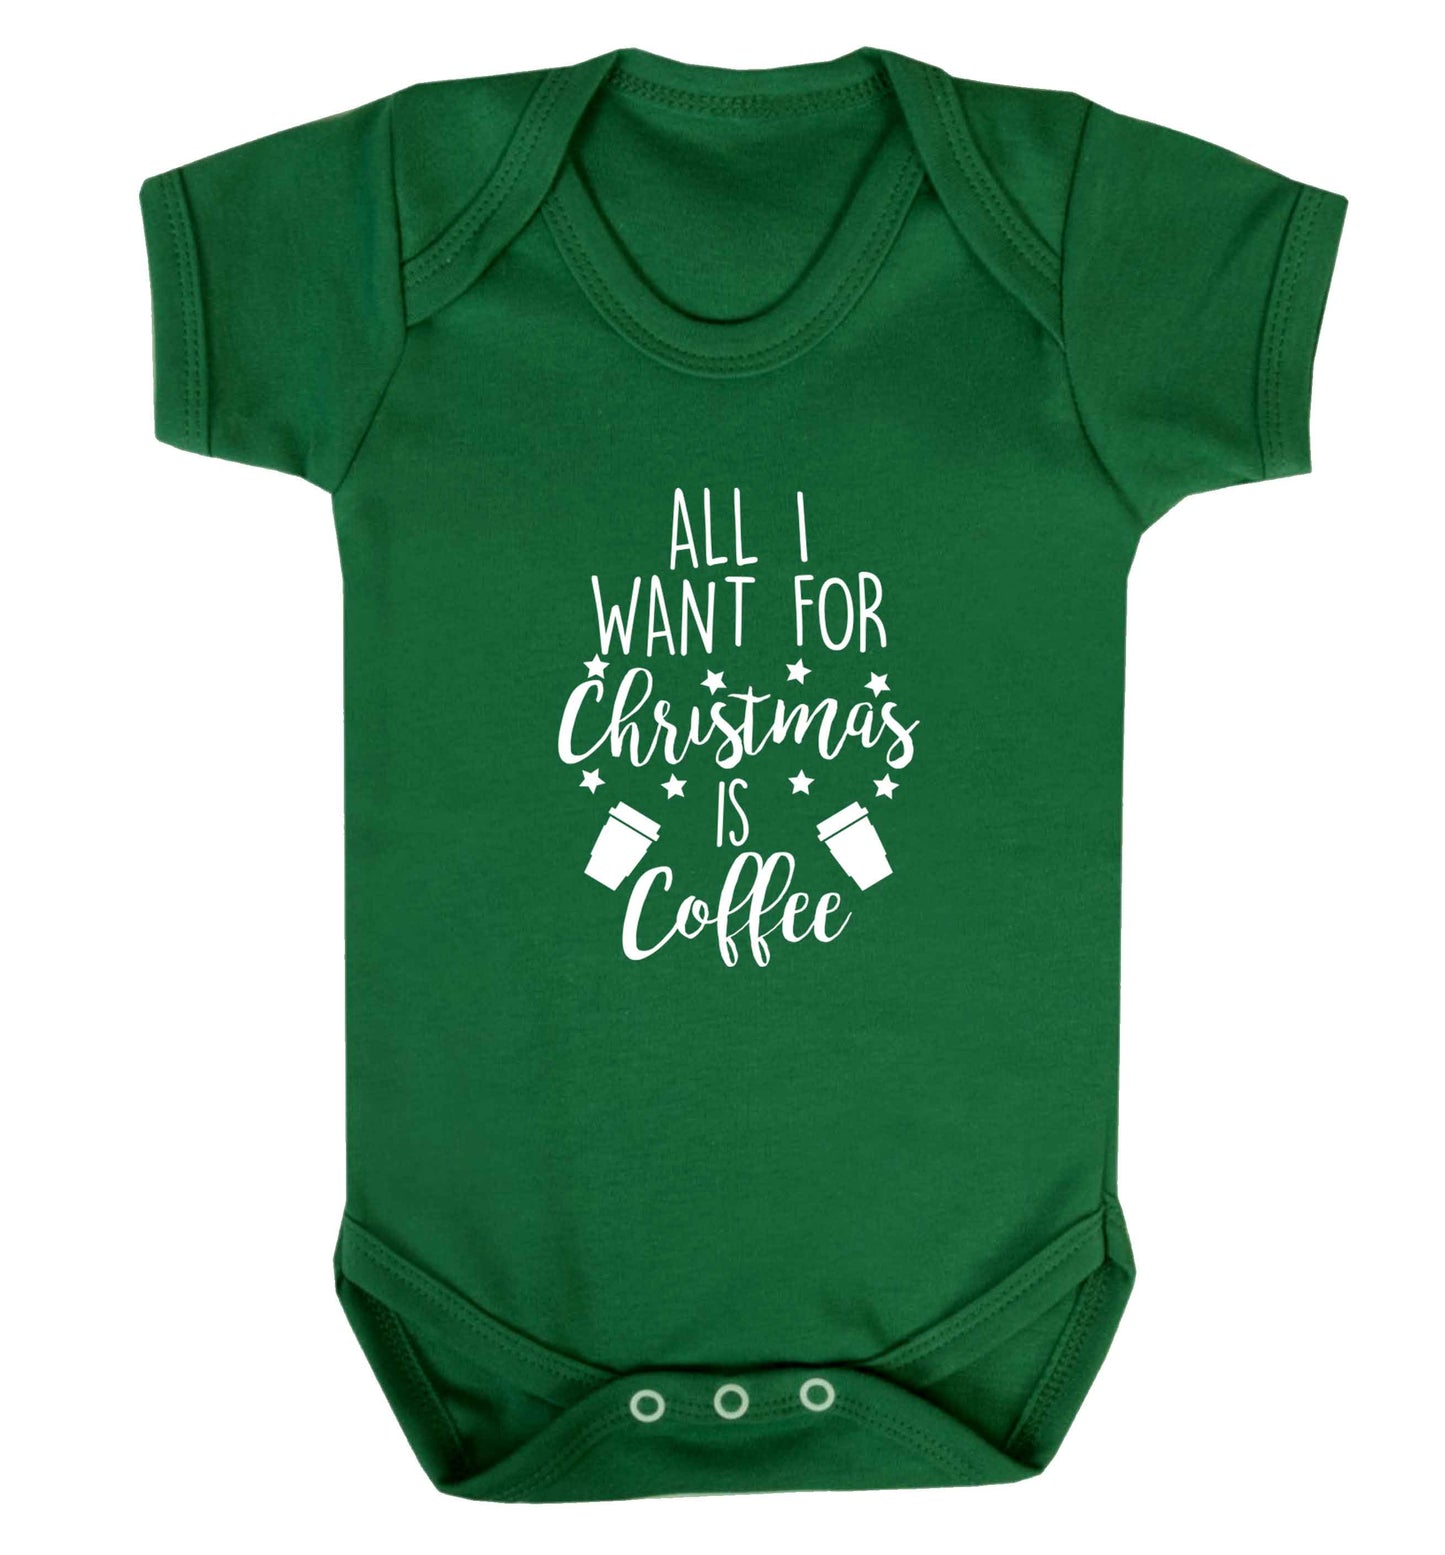 All I want for Christmas is coffee Baby Vest green 18-24 months